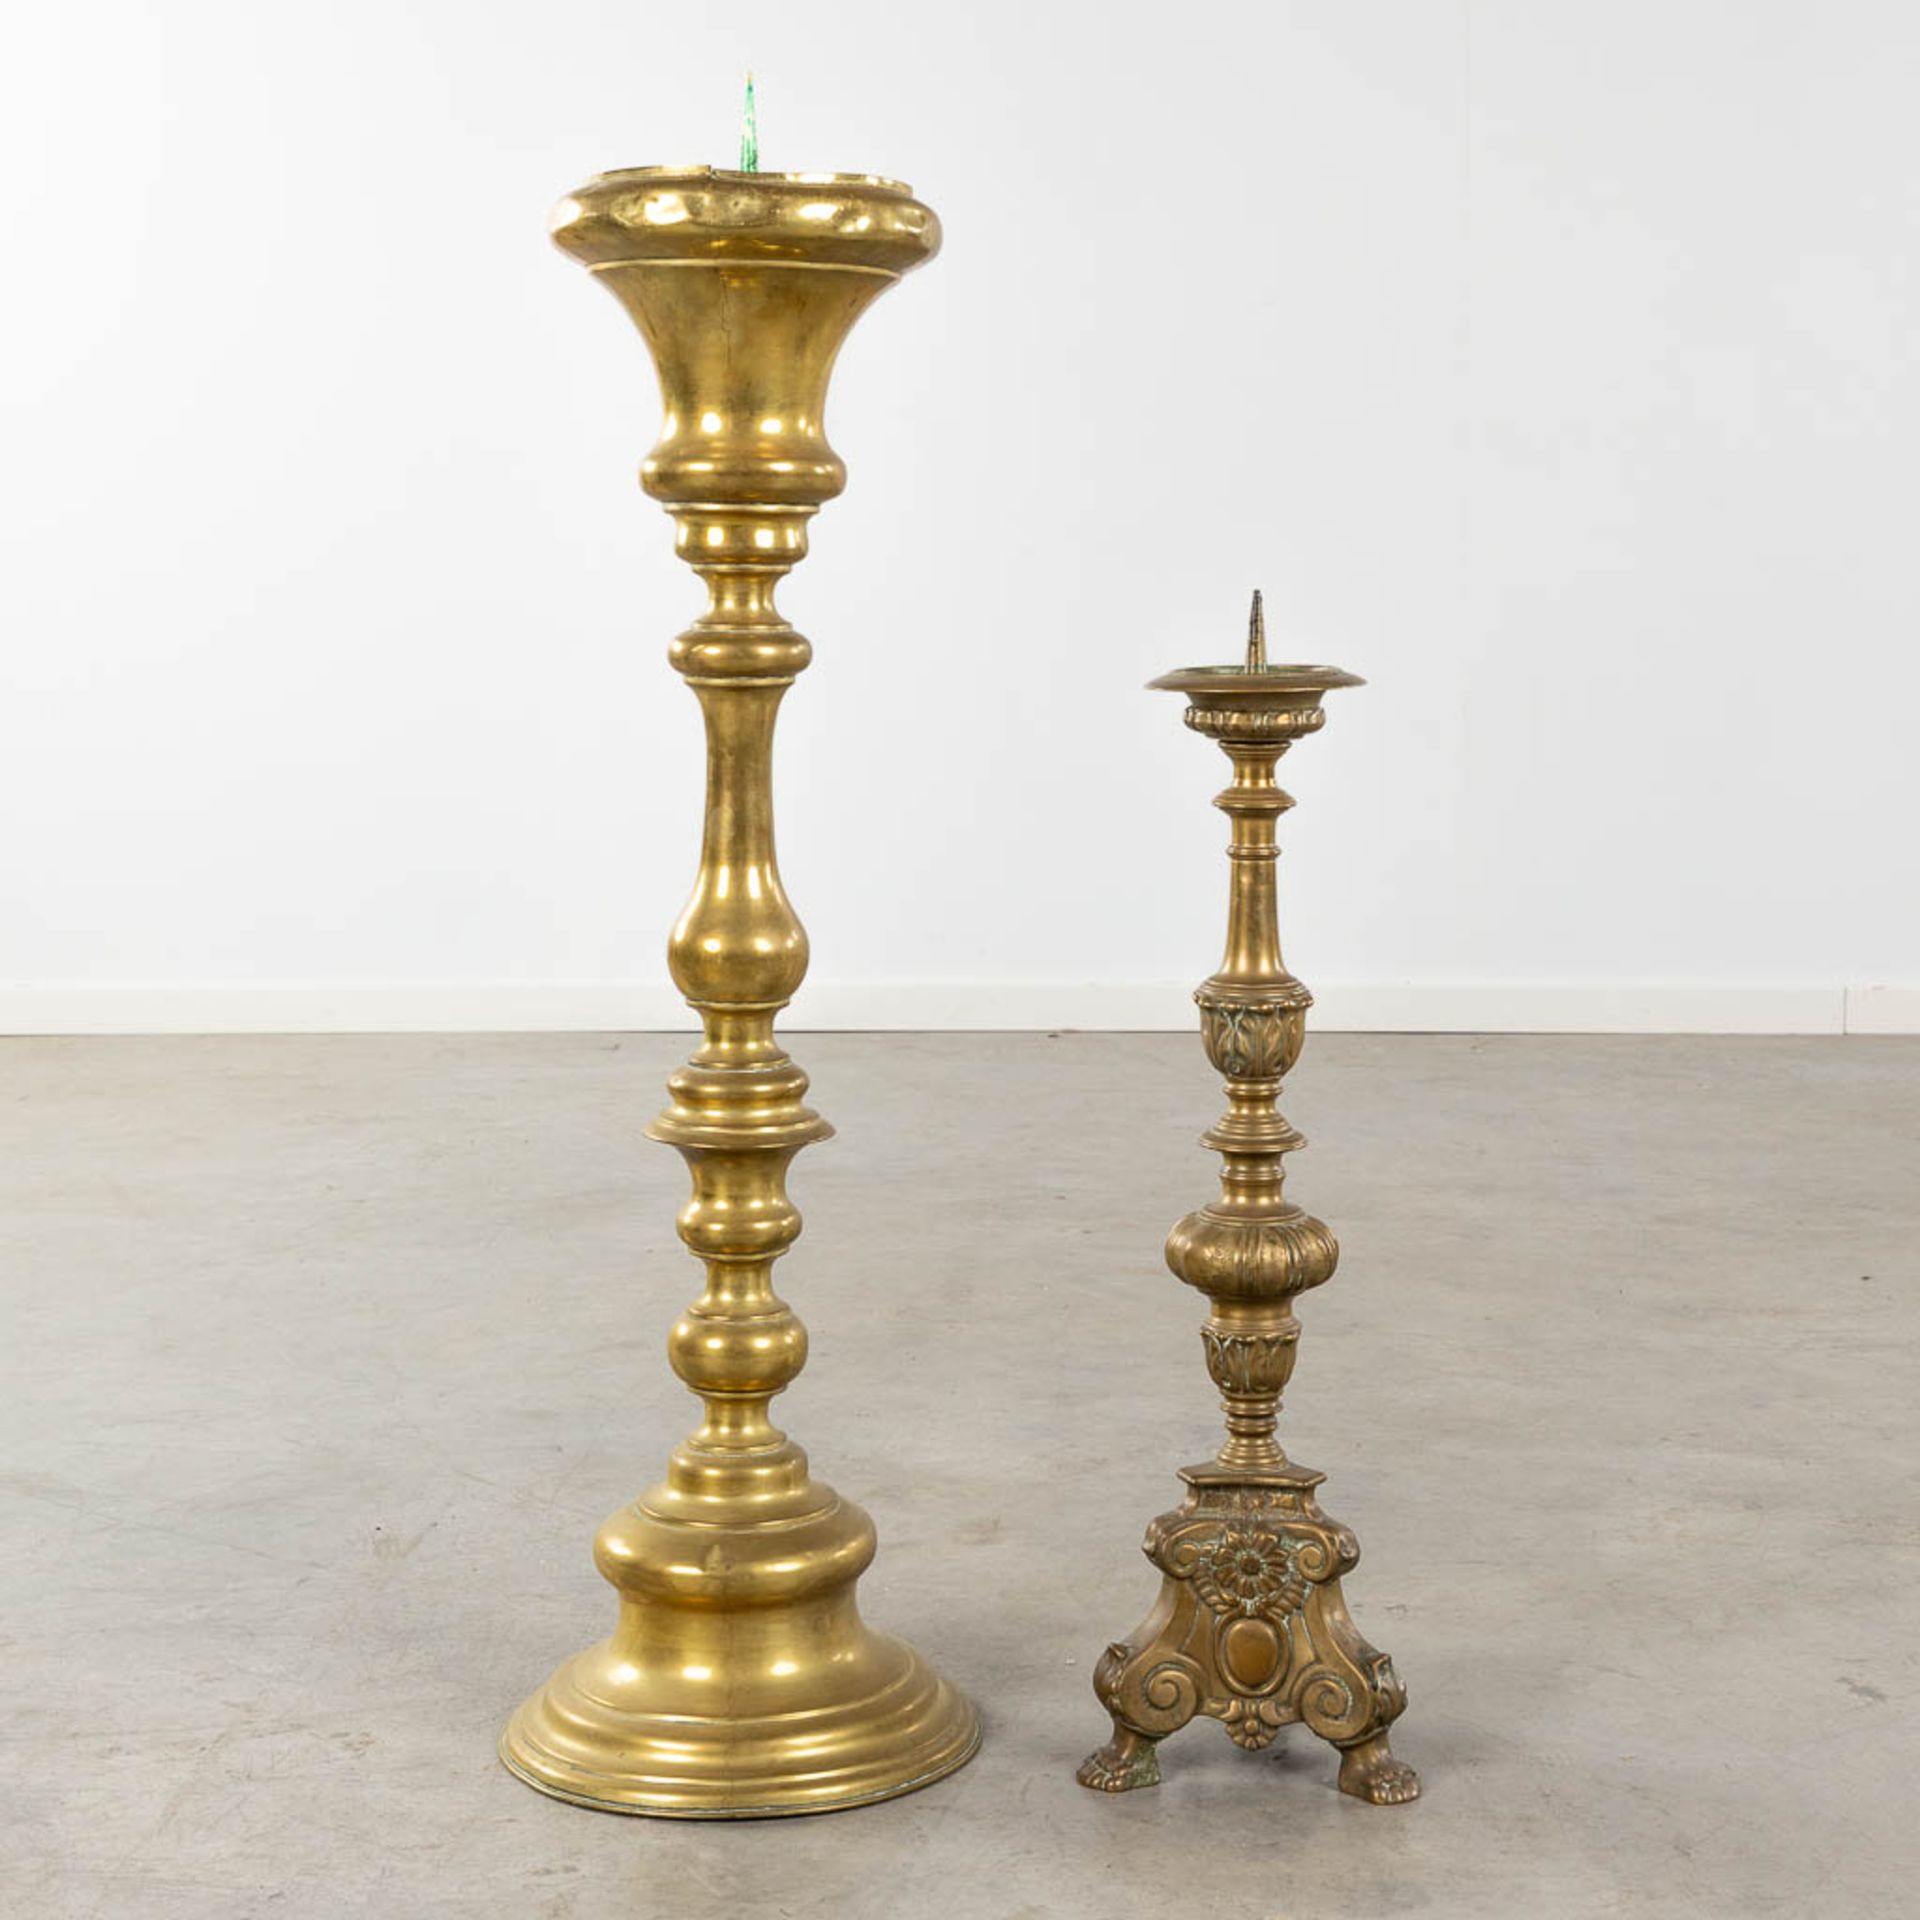 Two Church candlesticks, bronze and copper. 19th and 20th C. (H:94 x D:28 cm) - Image 5 of 11